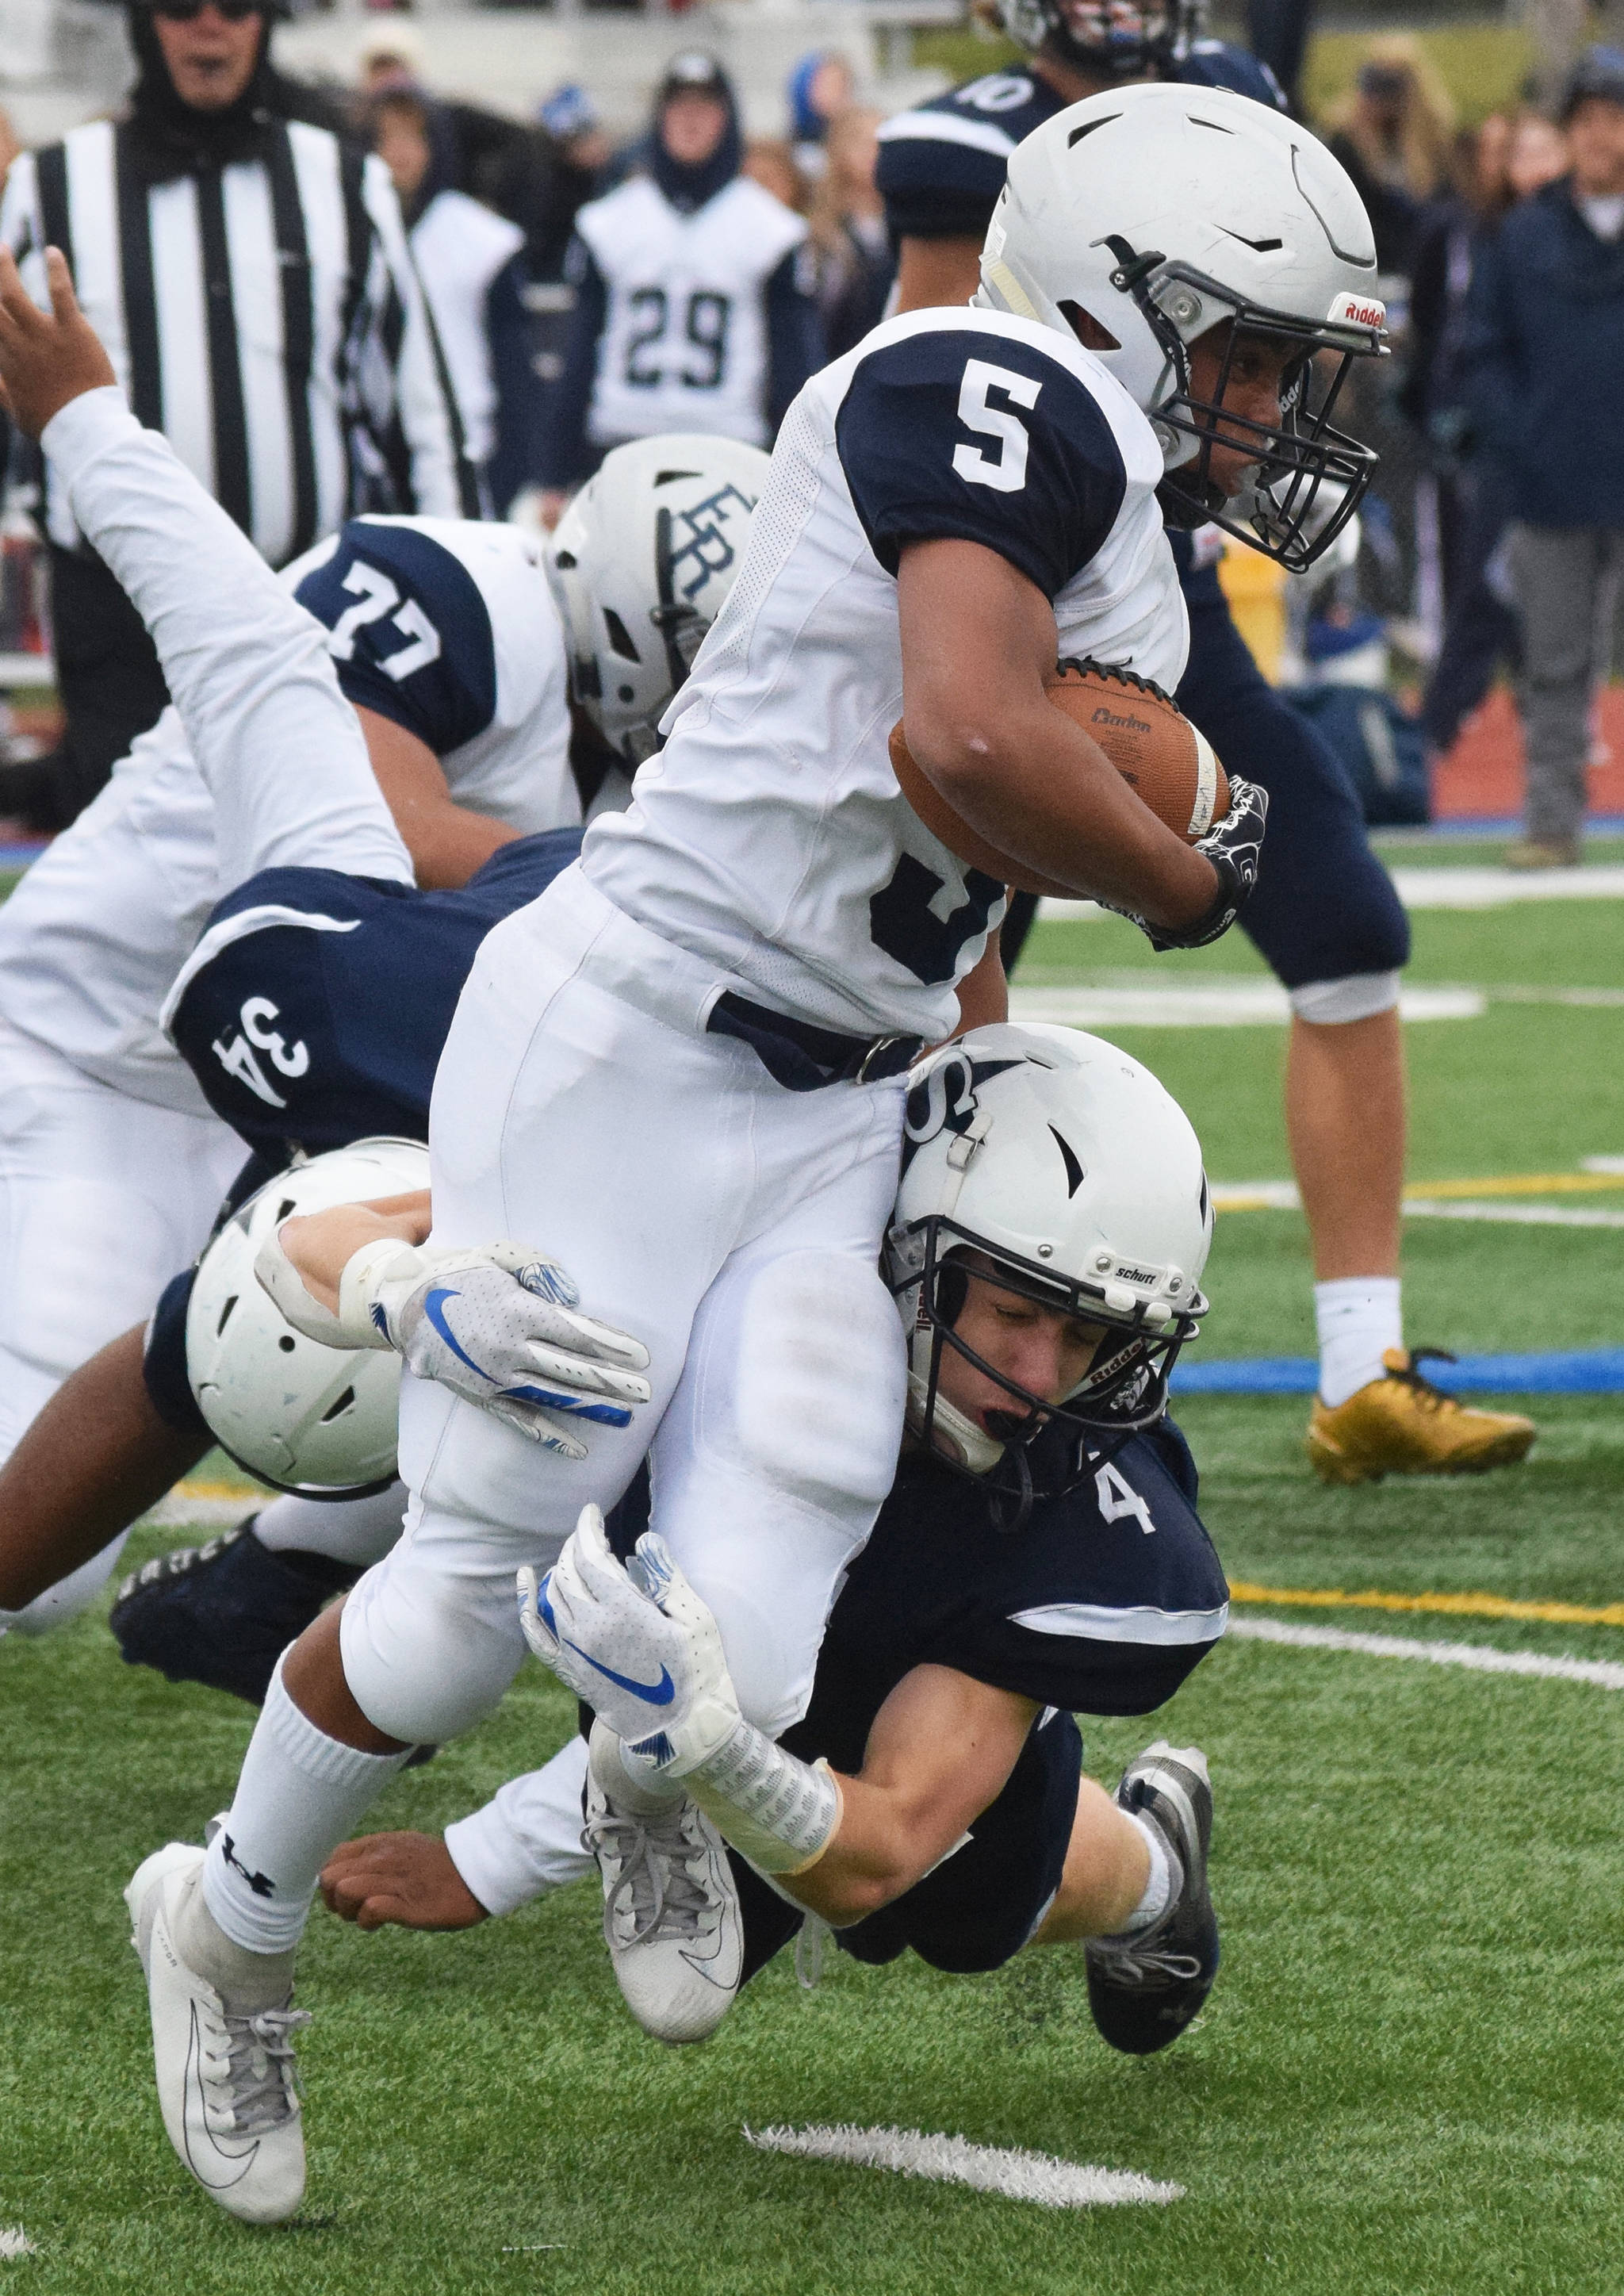 Soldotna’s Jersey Truesdell (bottom) tackles Eagle River’s Cashiez Reaves, Saturday, Sept. 28, 2019, against Eagle River at Justin Maile Field in Soldotna. (Photo by Joey Klecka/Peninsula Clarion)